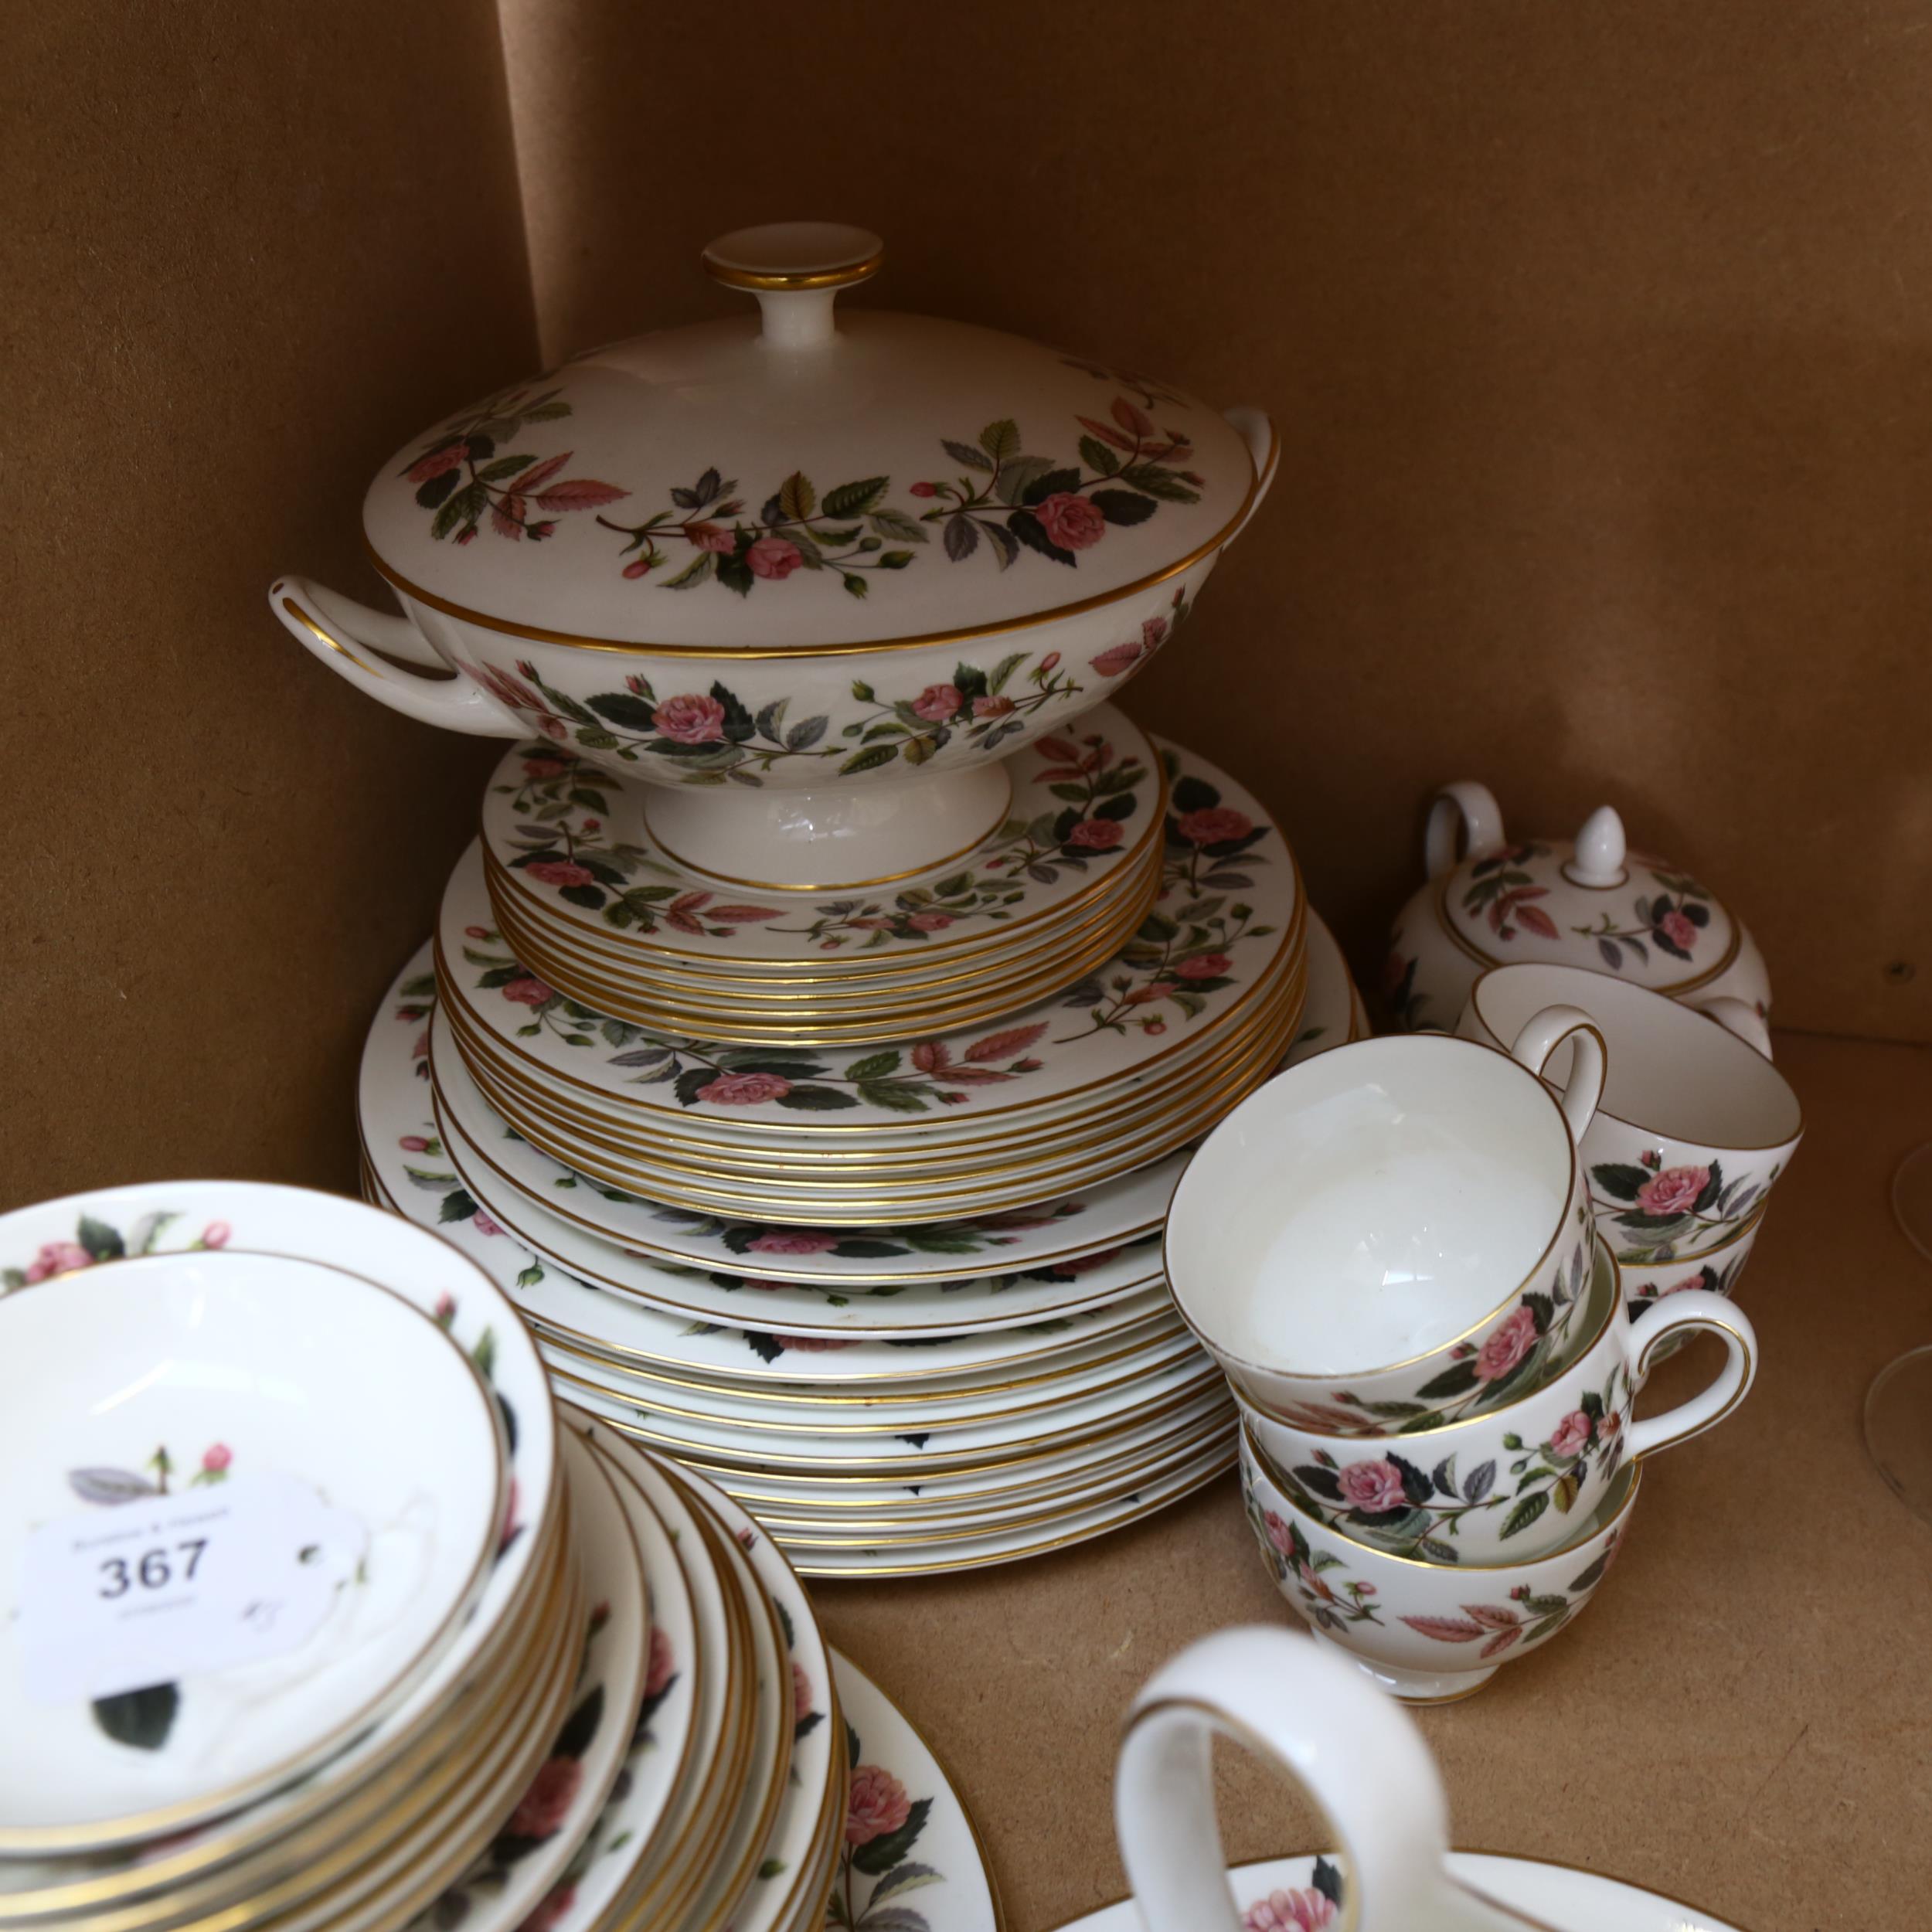 Extensive Wedgwood dinner service and matching tea set, including jugs, sugar bowl and meat plate, - Image 2 of 2